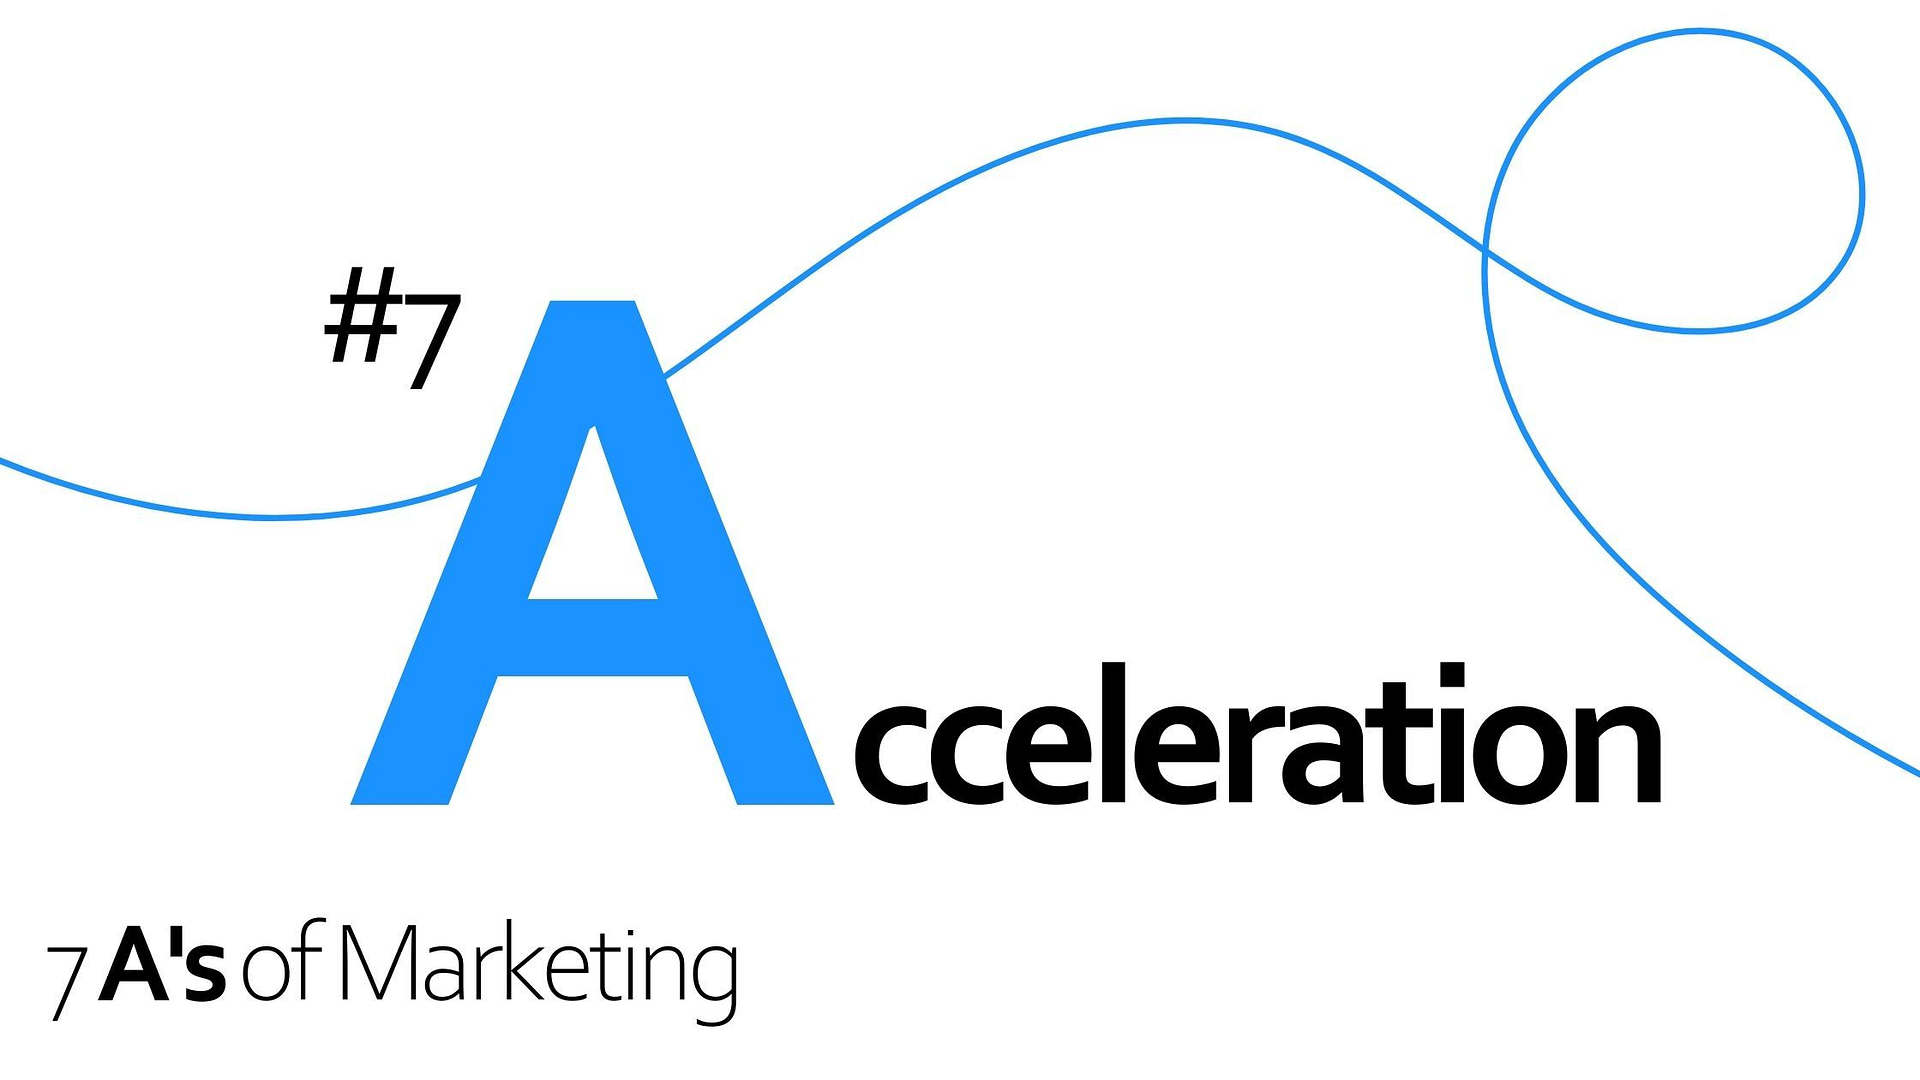 7 A's of Marketing - #7 Acceleration